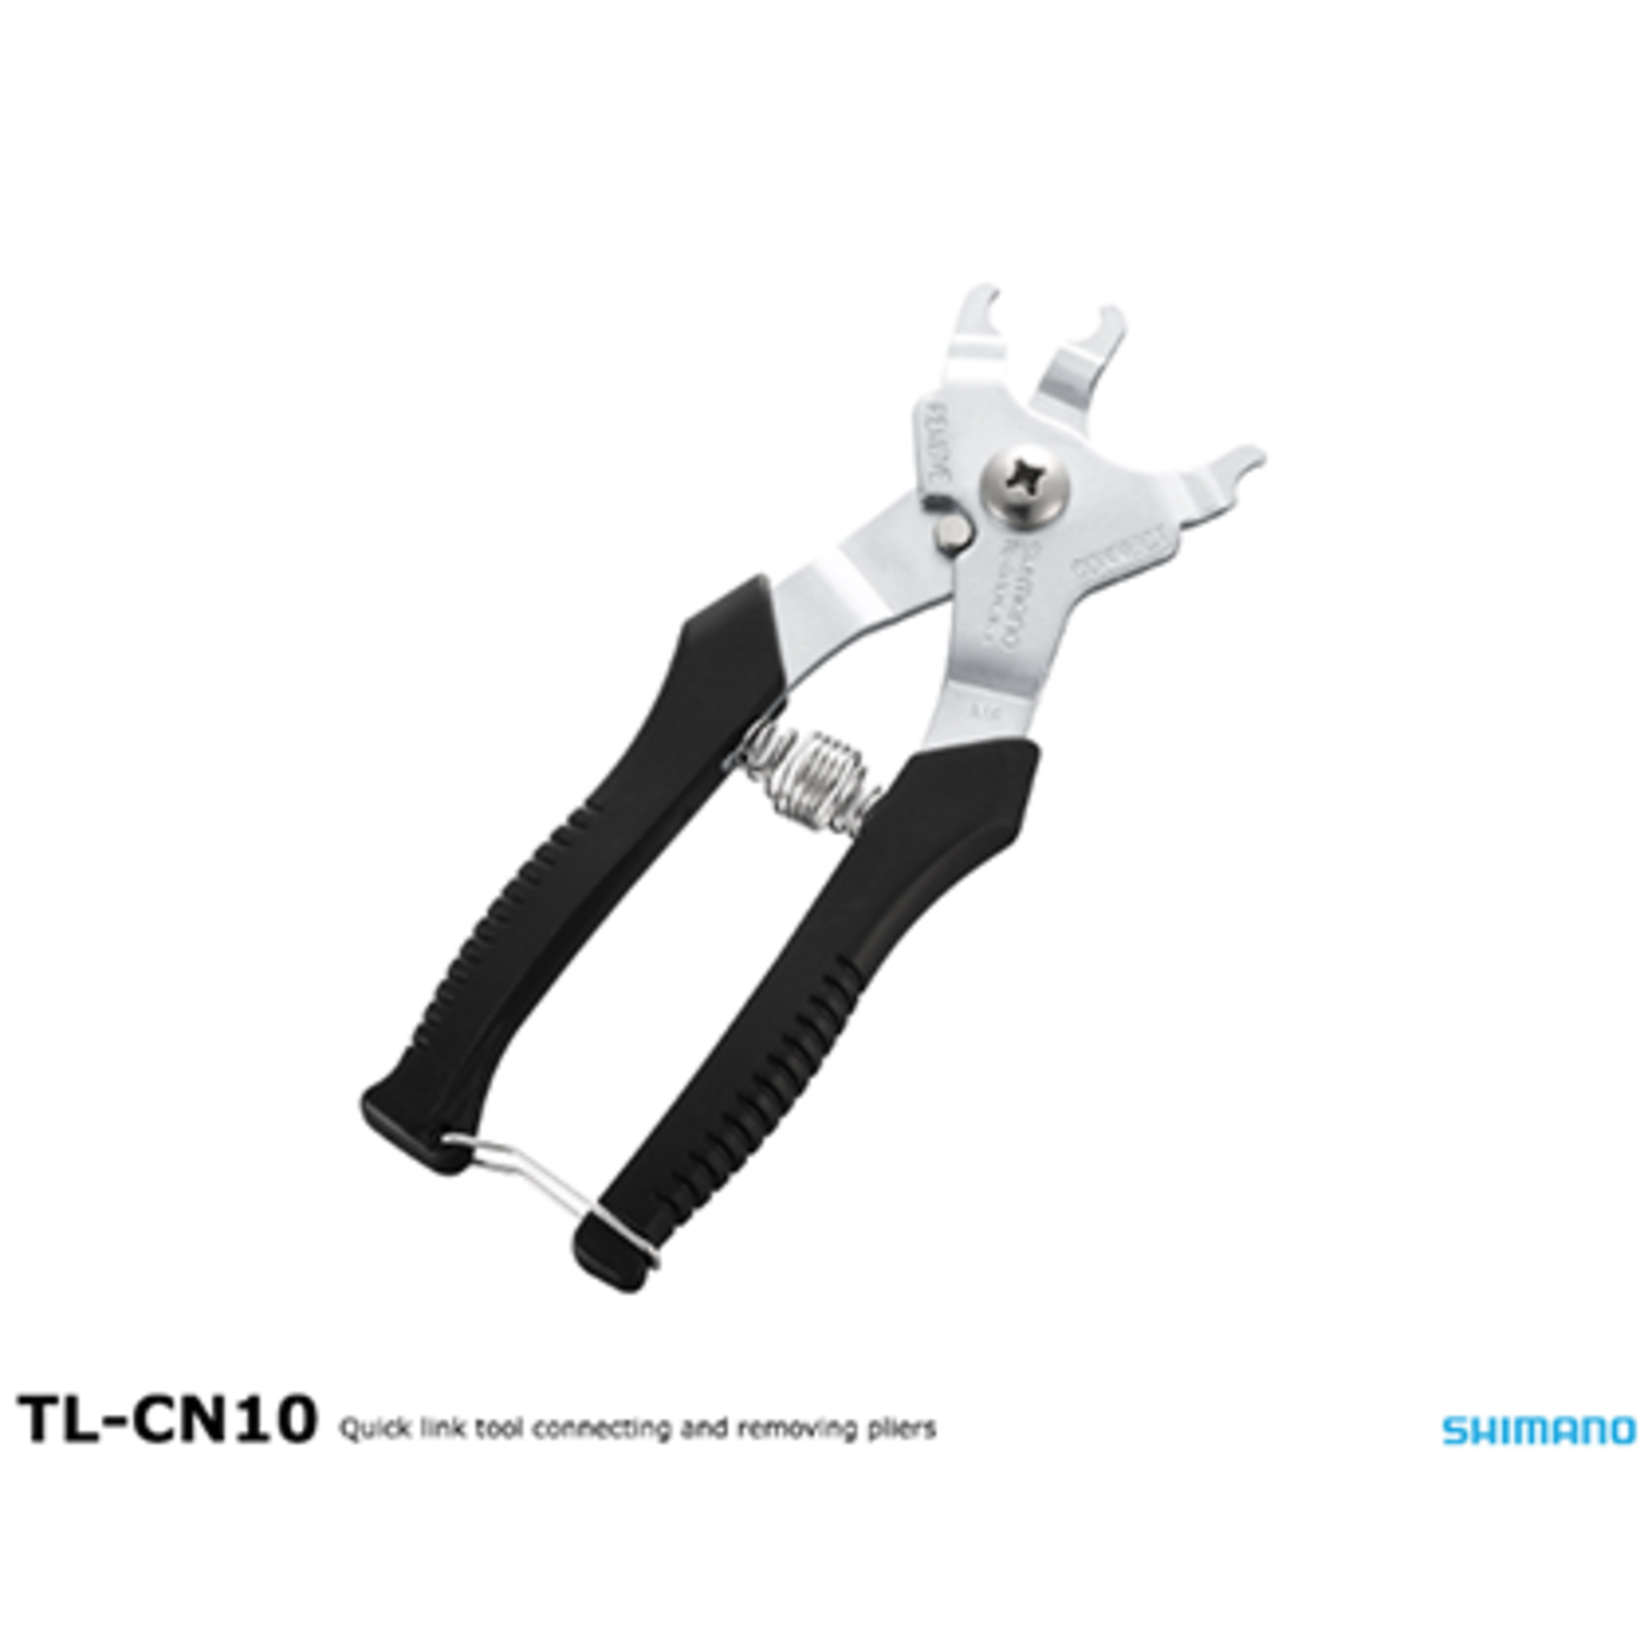 SHIMANO TL-CN10 QUICK LINK TOOL CONNECTING AND REMOVAL PLIERS